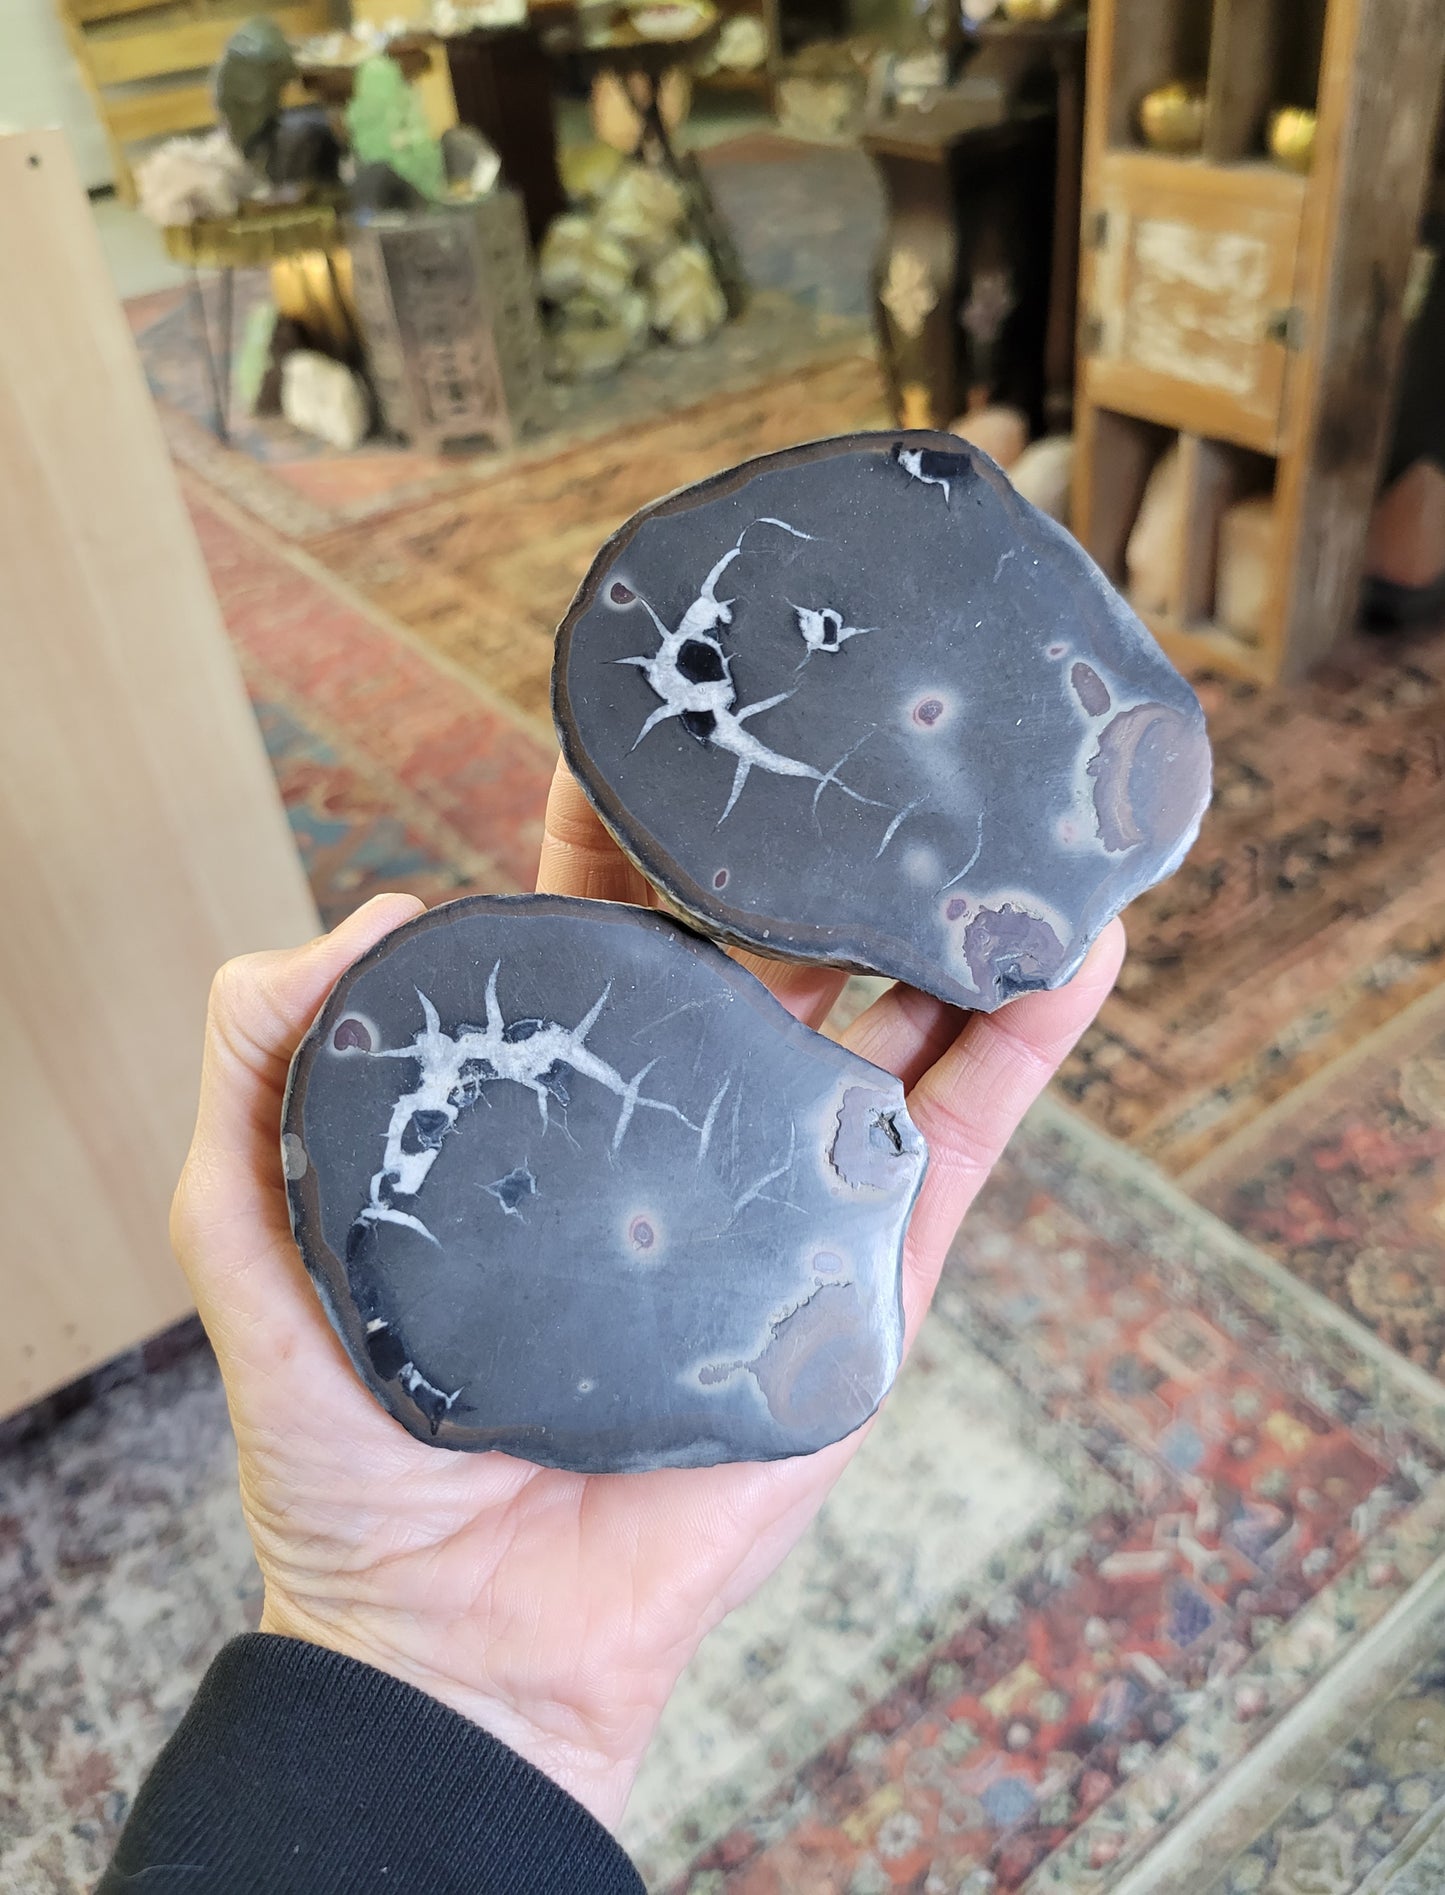 Septarian Polished Nodule from Morocco (2 7/8 X 3 1/2 X 1 1/4 inches)